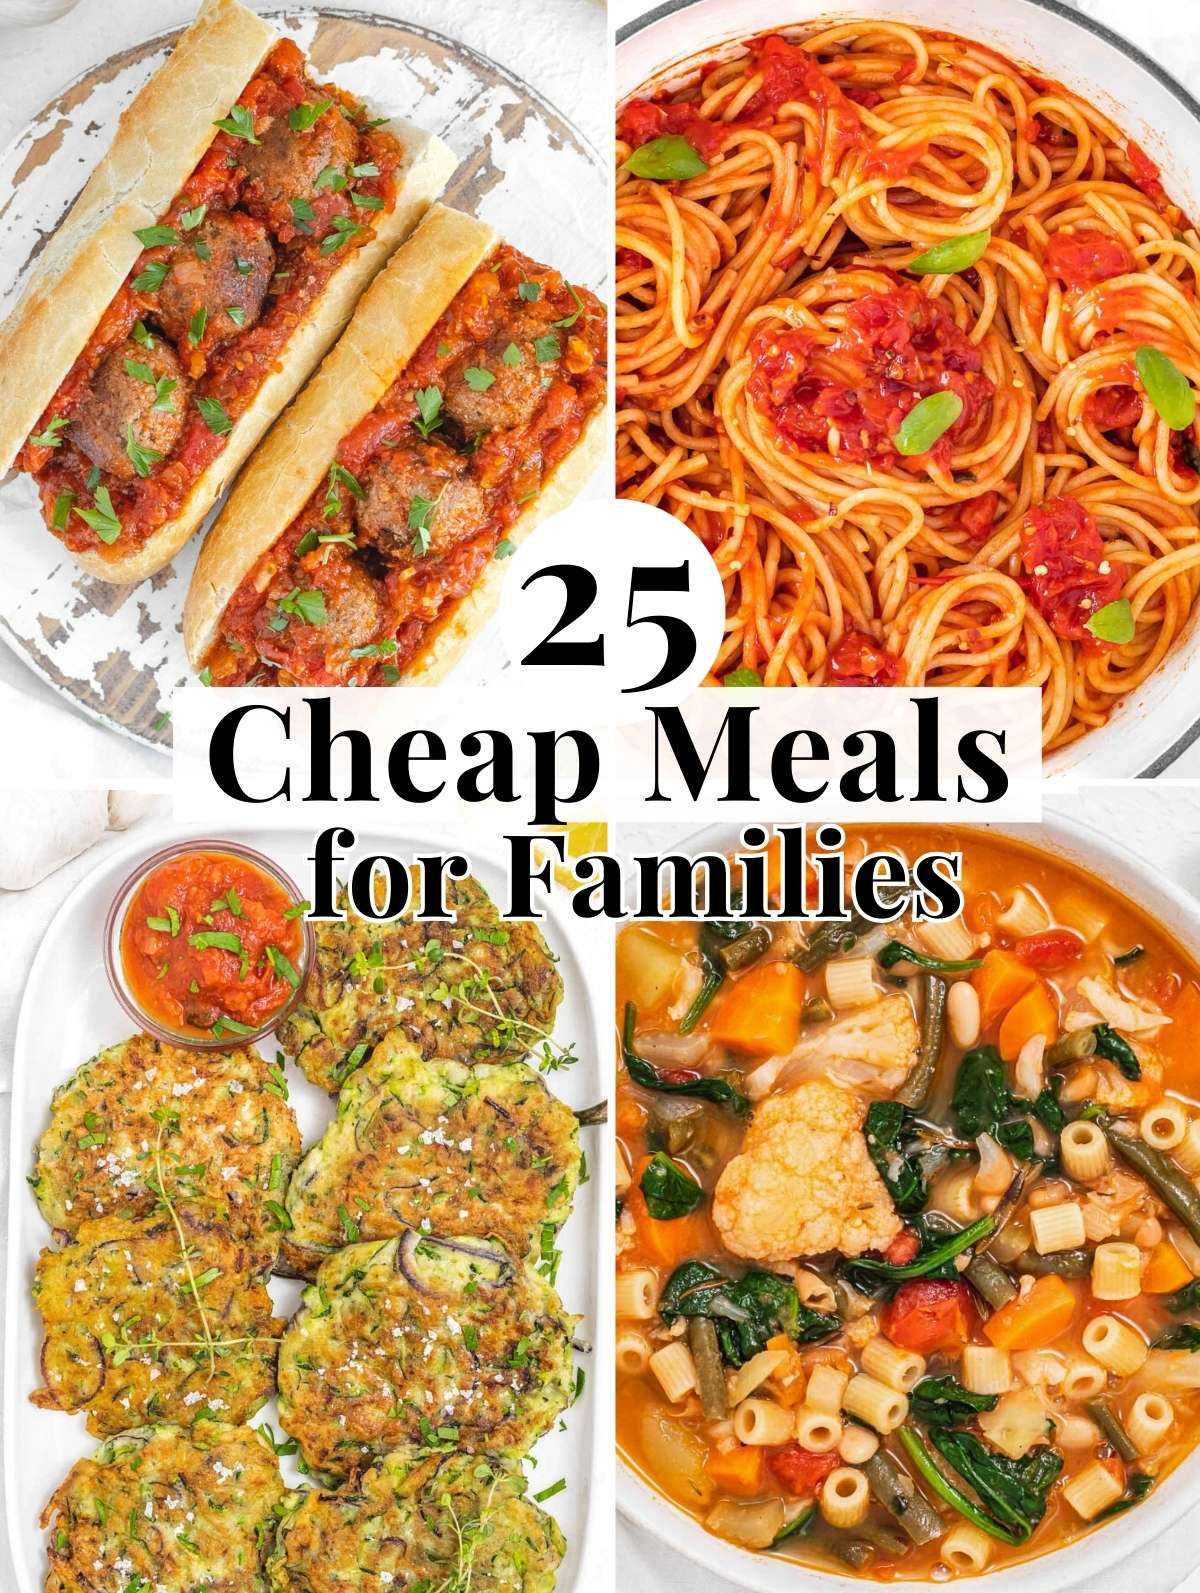 Cheap meals for families